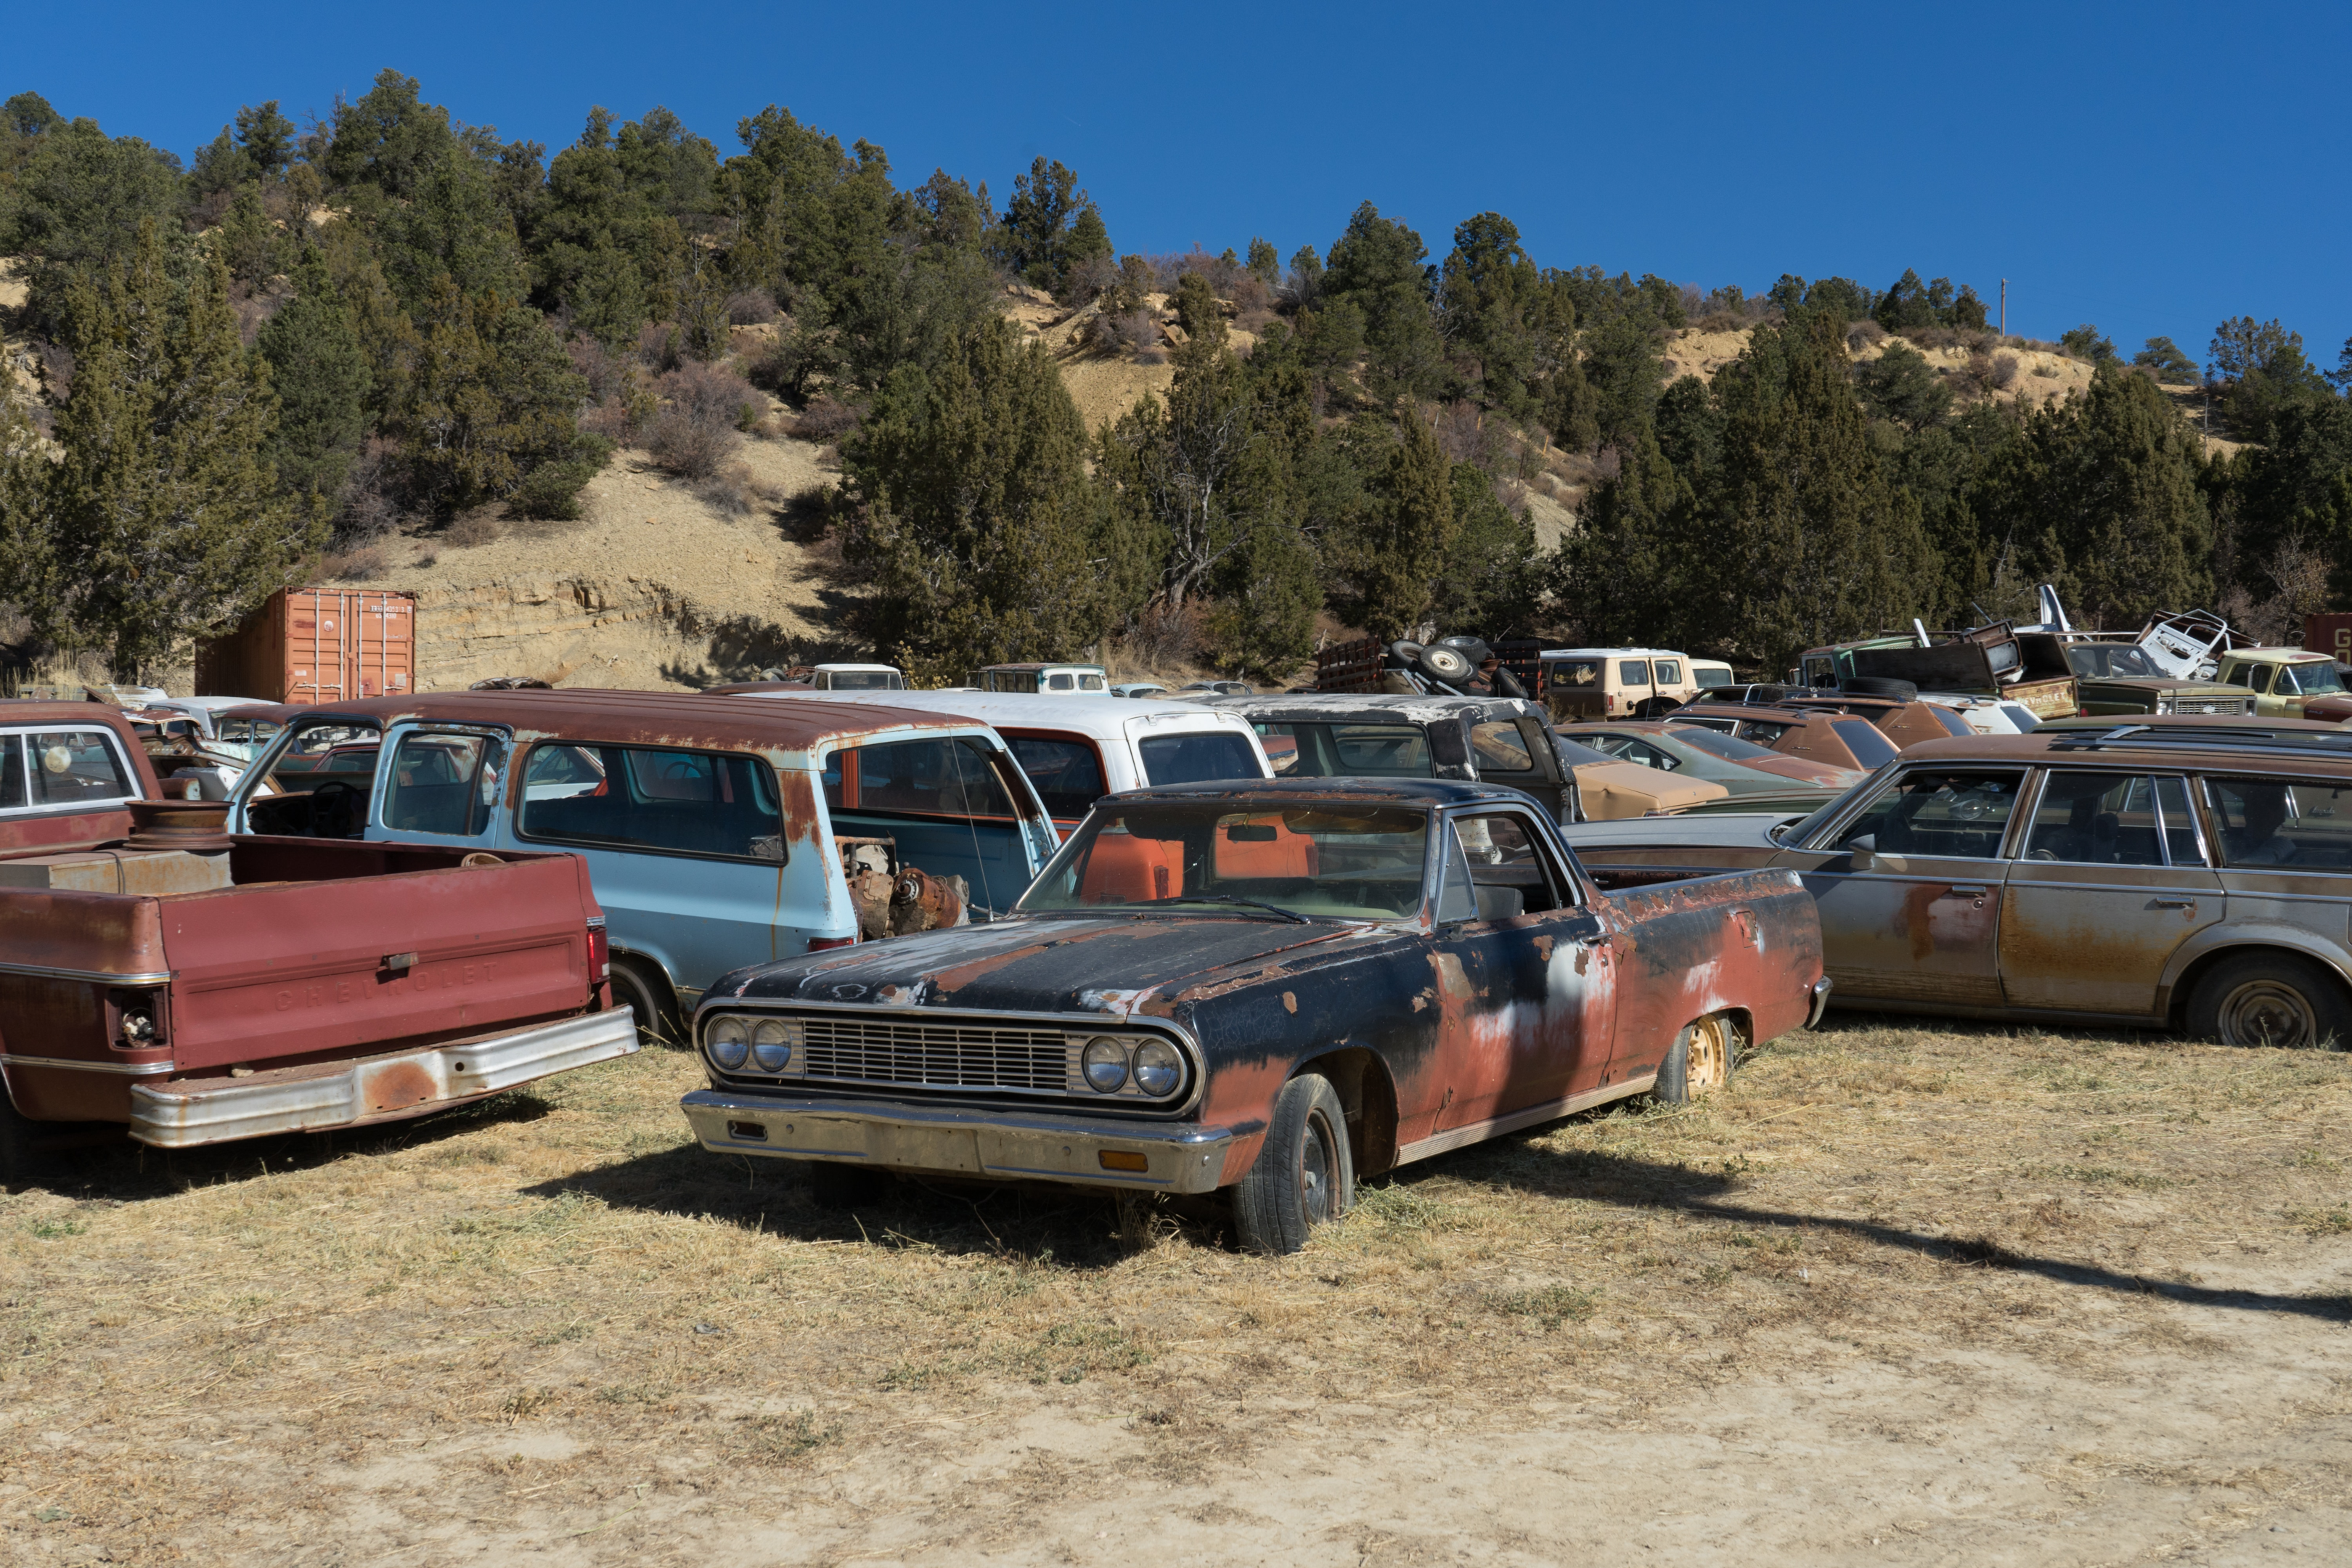 Is Cash For Cars a Junk car buyer?